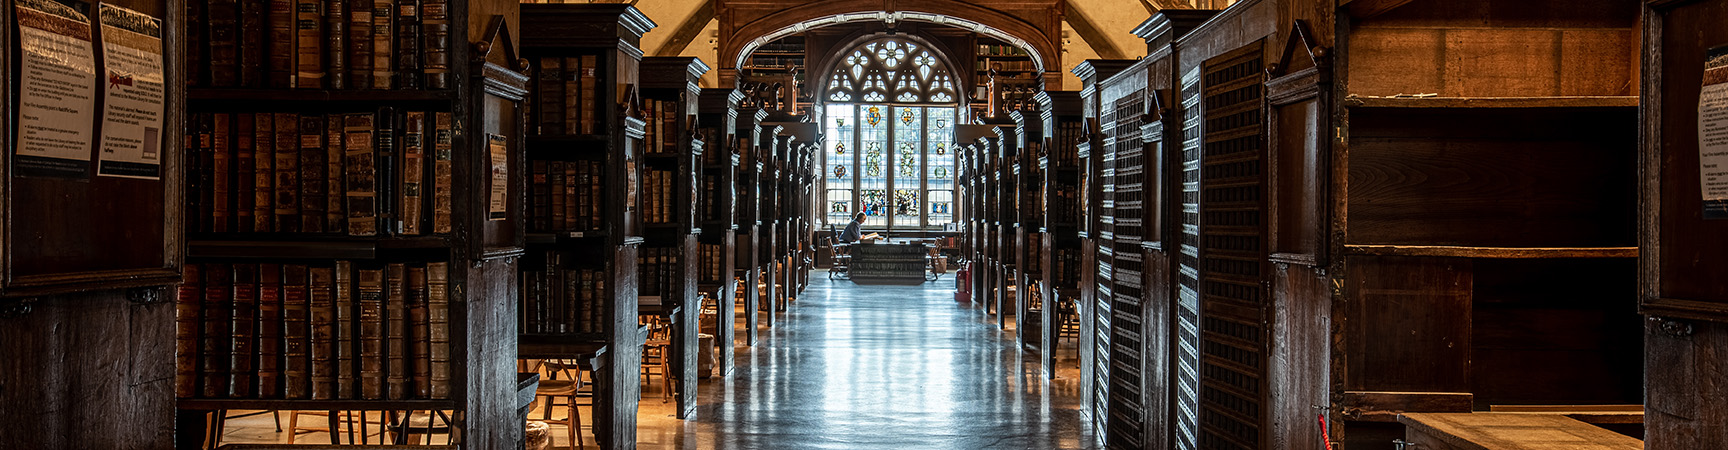 A long room with a stained glass window at the end, there are wooden book shelves and alcoves on either site